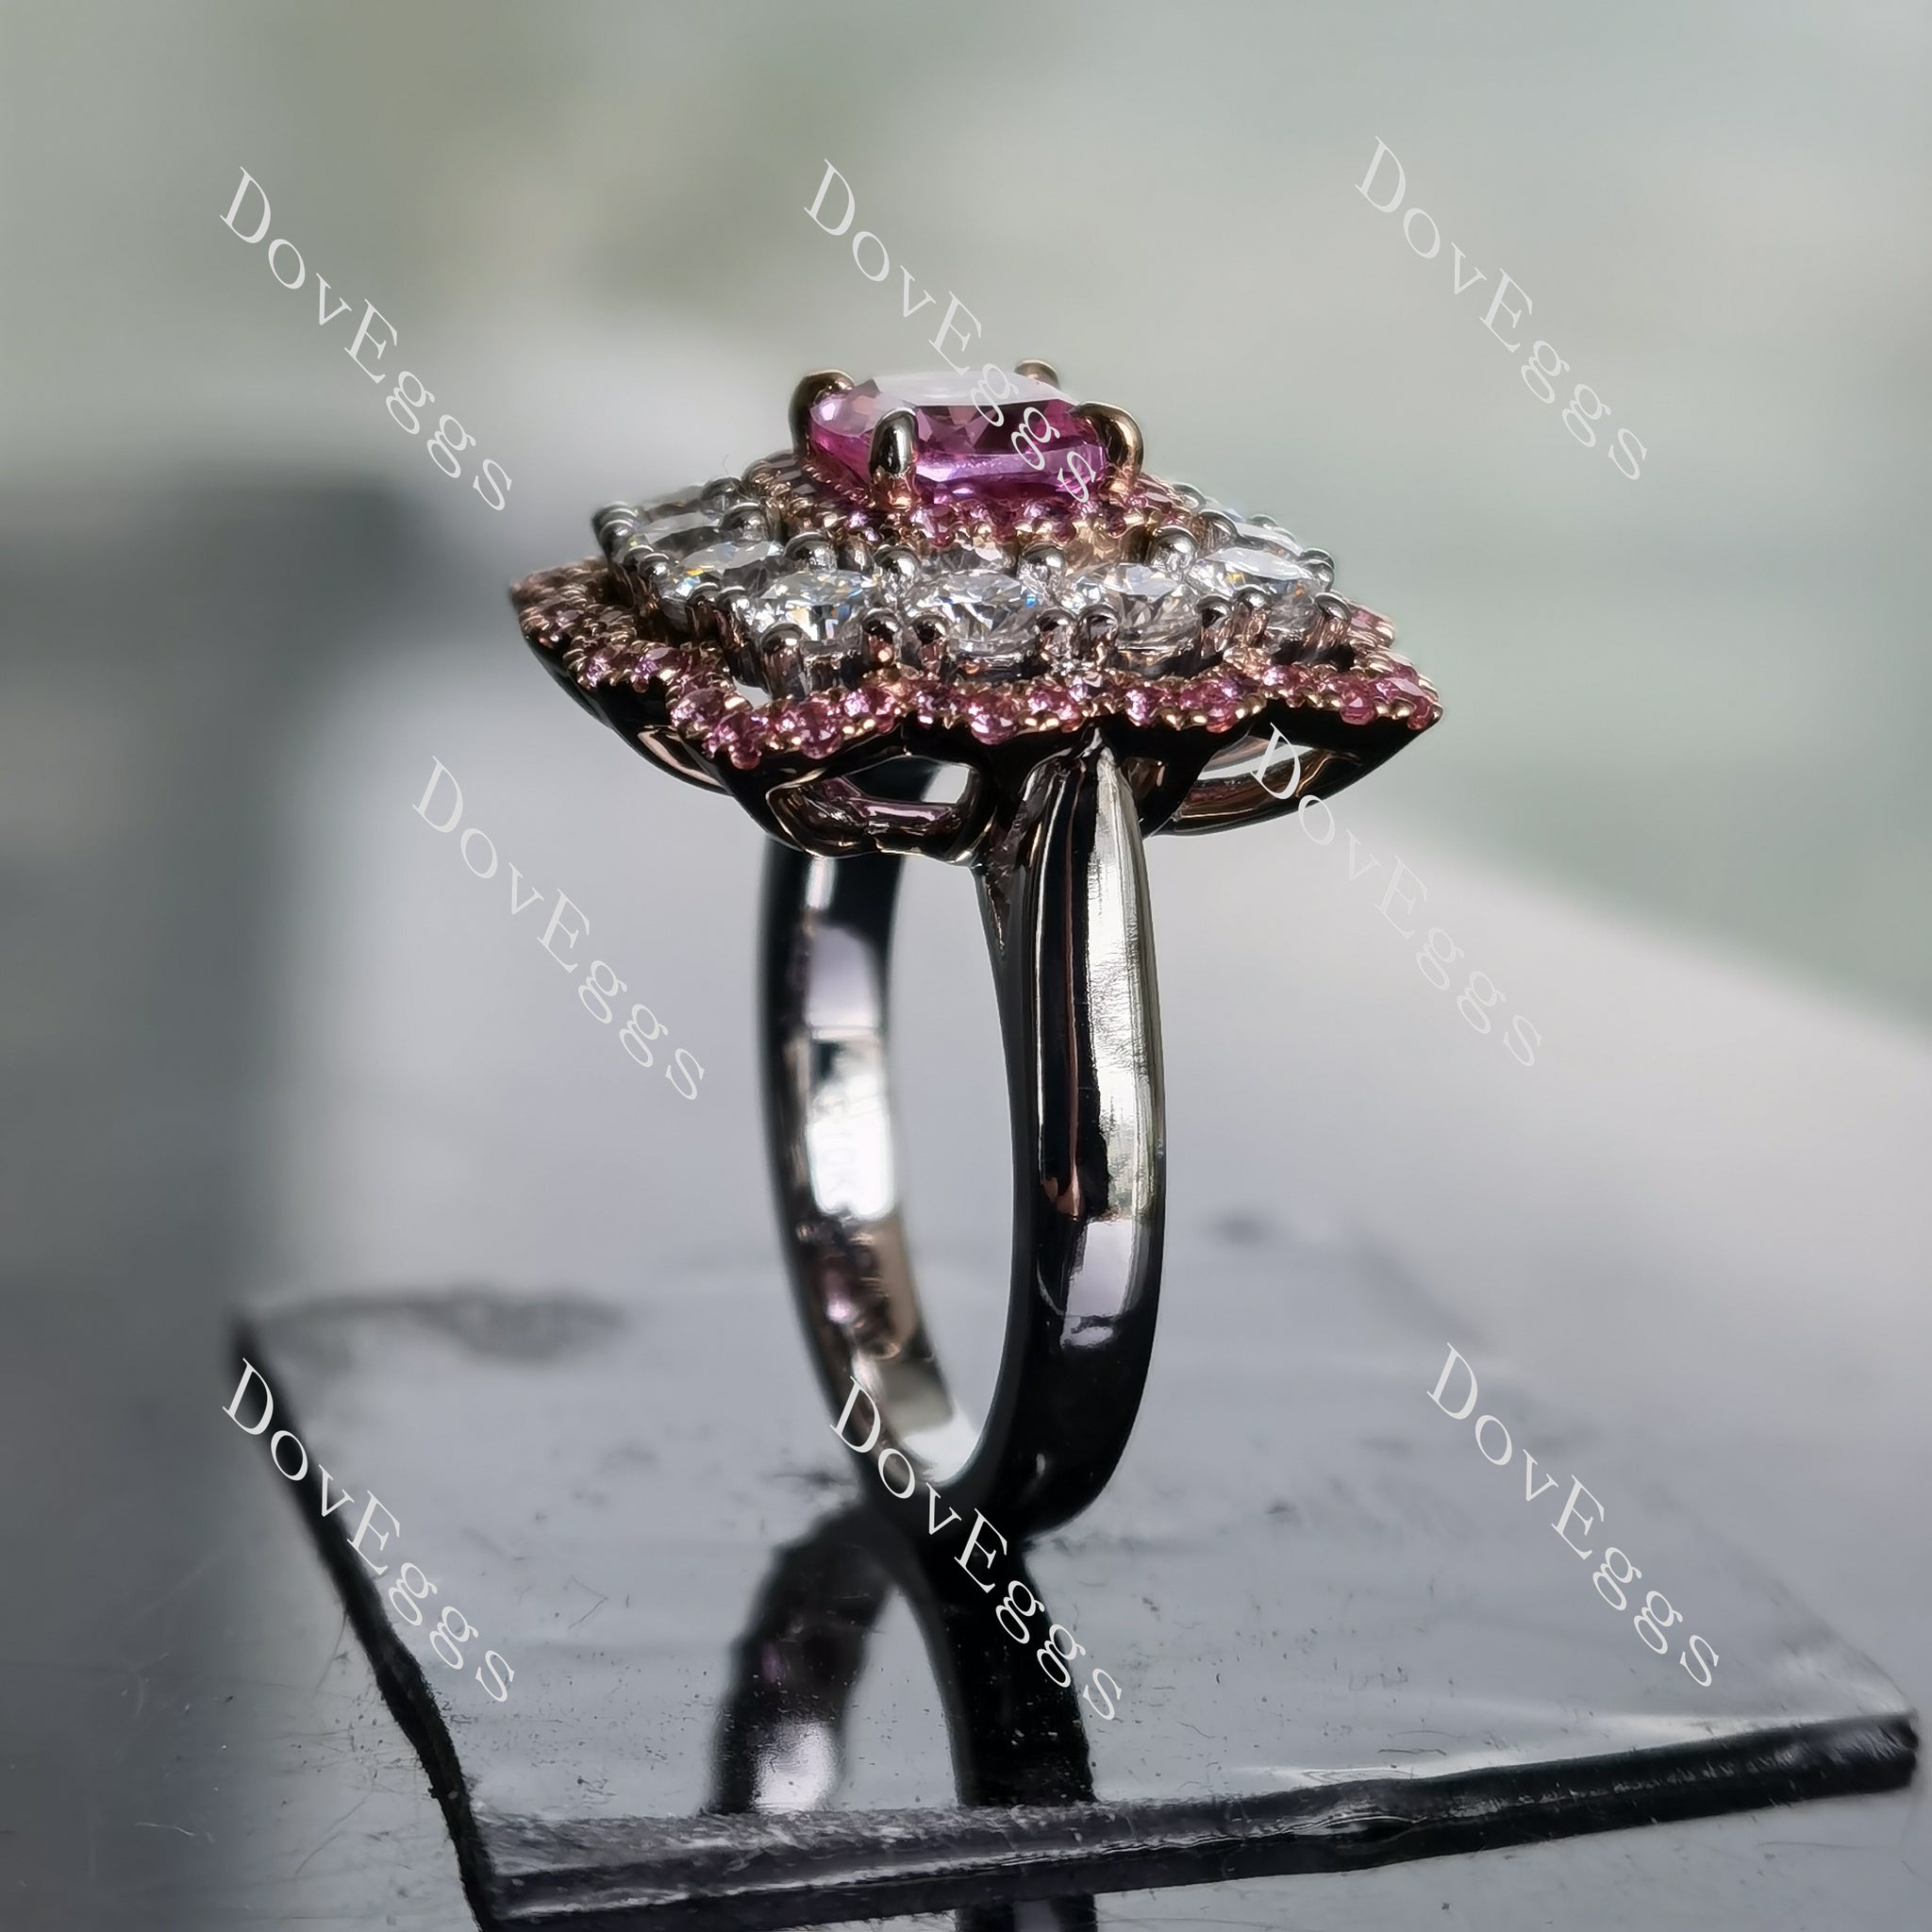 DovEggs cushion floral halo colored gem engagement ring